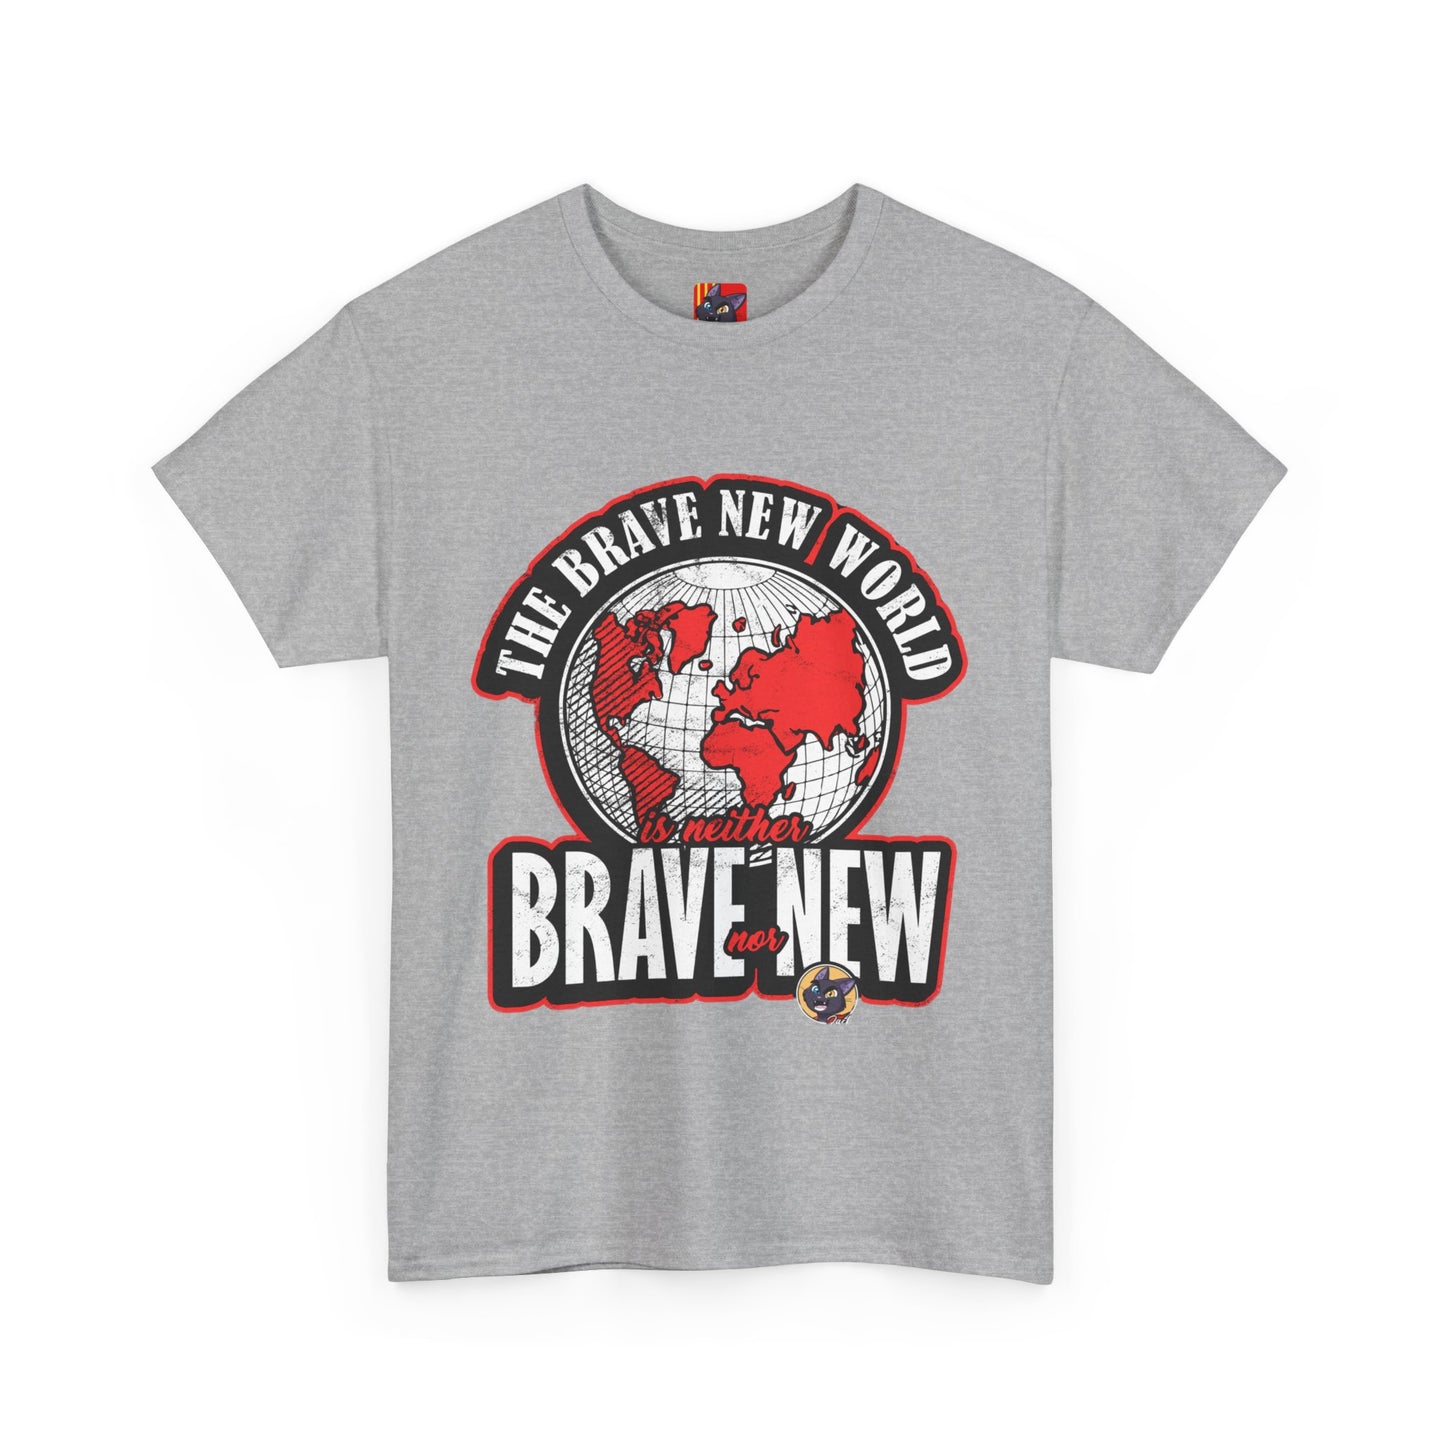 The Free Spirit T-Shirt: The brave new world is neither brave nor new Jack